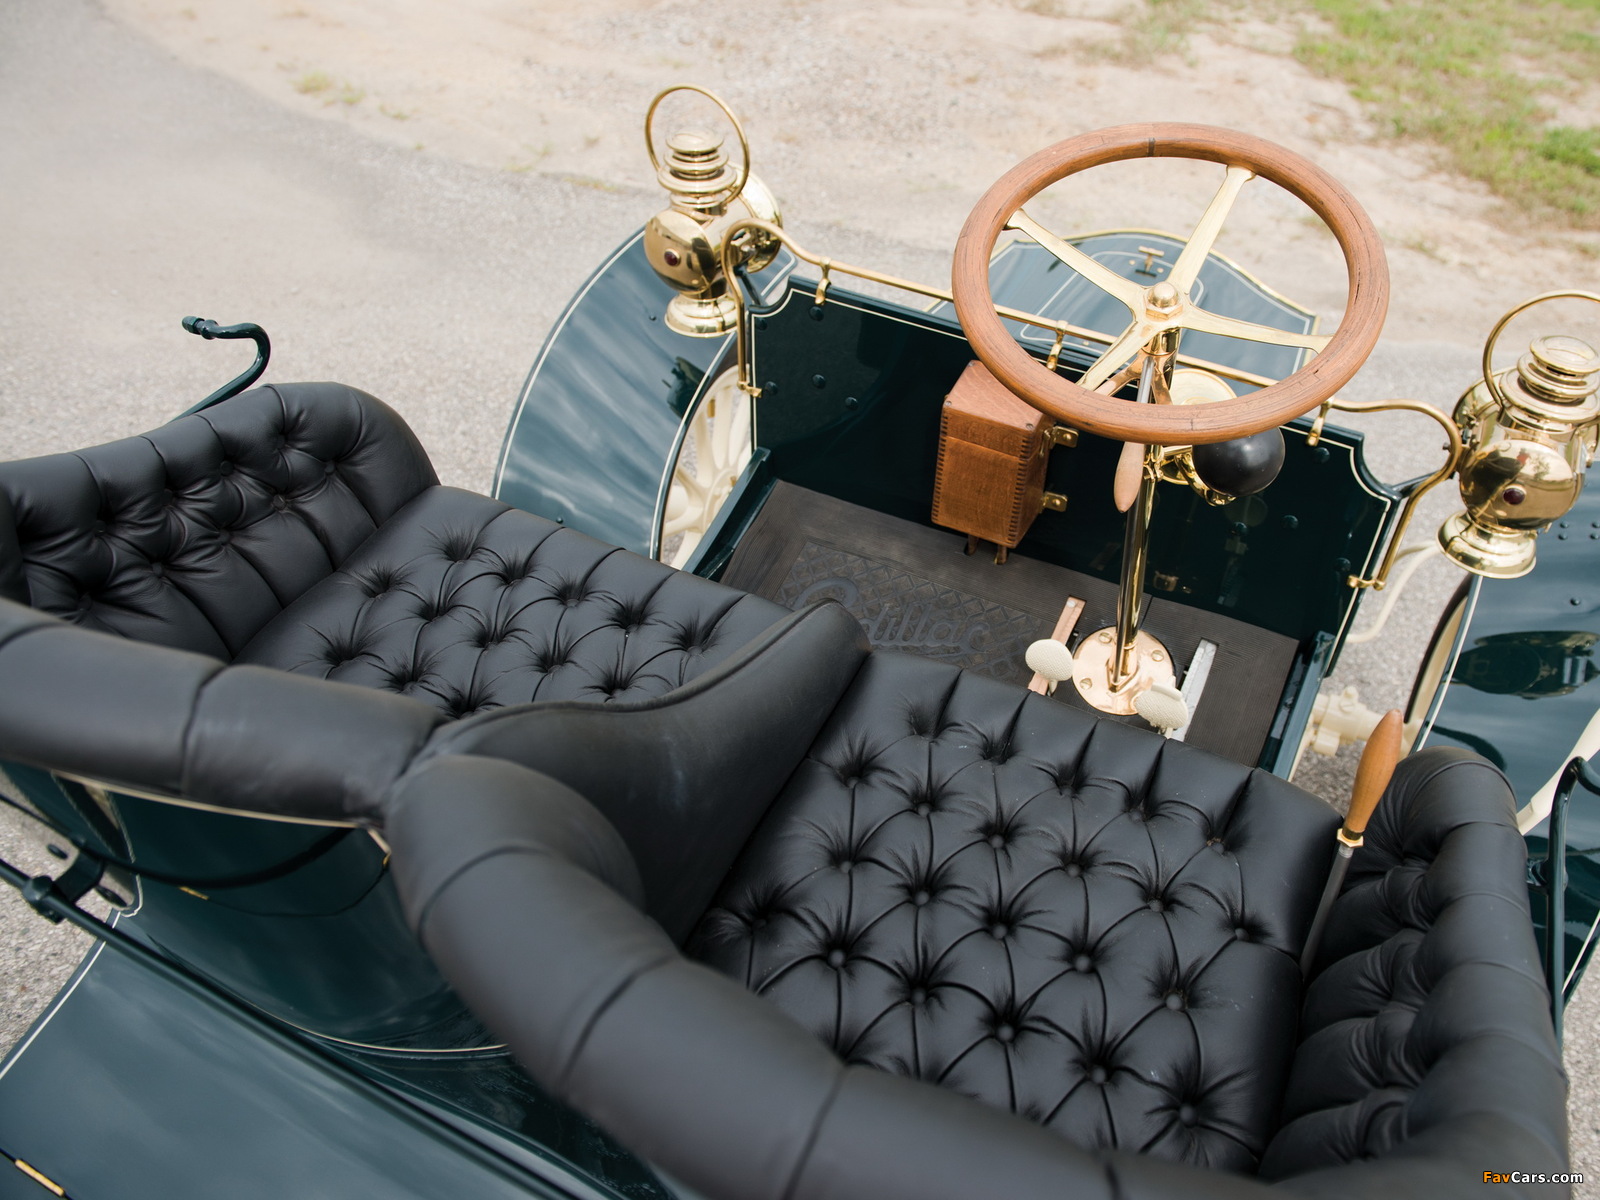 Pictures of Cadillac Model E Runabout 1905 (1600 x 1200)